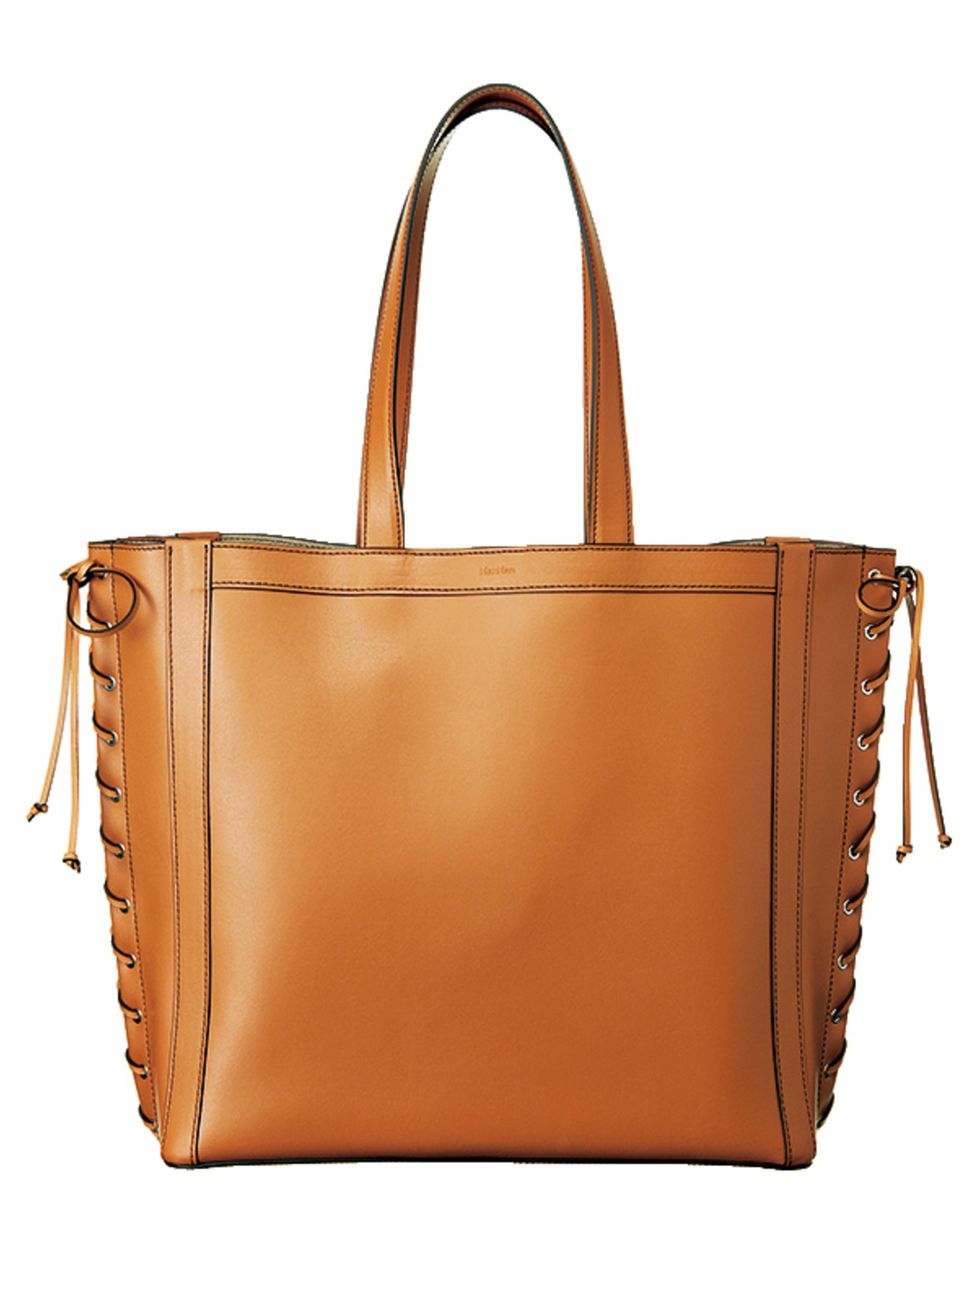 Product, Brown, Bag, Fashion accessory, Style, Amber, Tan, Luggage and bags, Leather, Shoulder bag, 